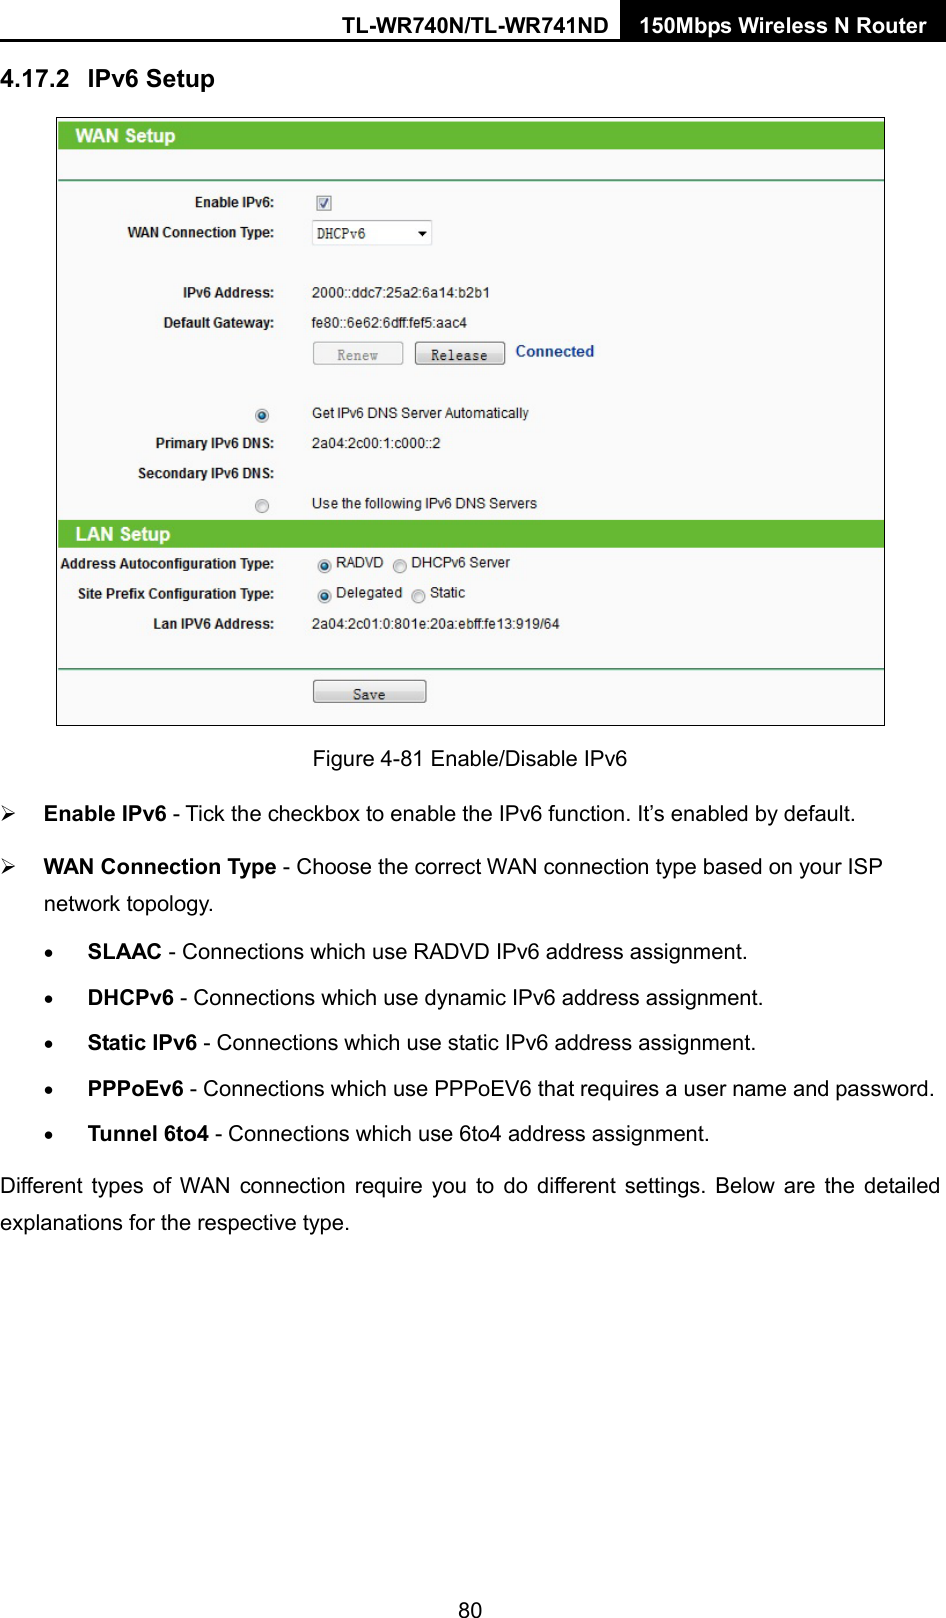 TL-WR740N/TL-WR741ND 150Mbps Wireless N Router  4.17.2 IPv6 Setup  Figure 4-81 Enable/Disable IPv6  Enable IPv6 - Tick the checkbox to enable the IPv6 function. It’s enabled by default.  WAN Connection Type - Choose the correct WAN connection type based on your ISP network topology. • SLAAC - Connections which use RADVD IPv6 address assignment. • DHCPv6 - Connections which use dynamic IPv6 address assignment.   • Static IPv6 - Connections which use static IPv6 address assignment.   • PPPoEv6 - Connections which use PPPoEV6 that requires a user name and password.   • Tunnel 6to4 - Connections which use 6to4 address assignment. Different types of WAN connection require you to do different settings. Below are the detailed explanations for the respective type. 80 